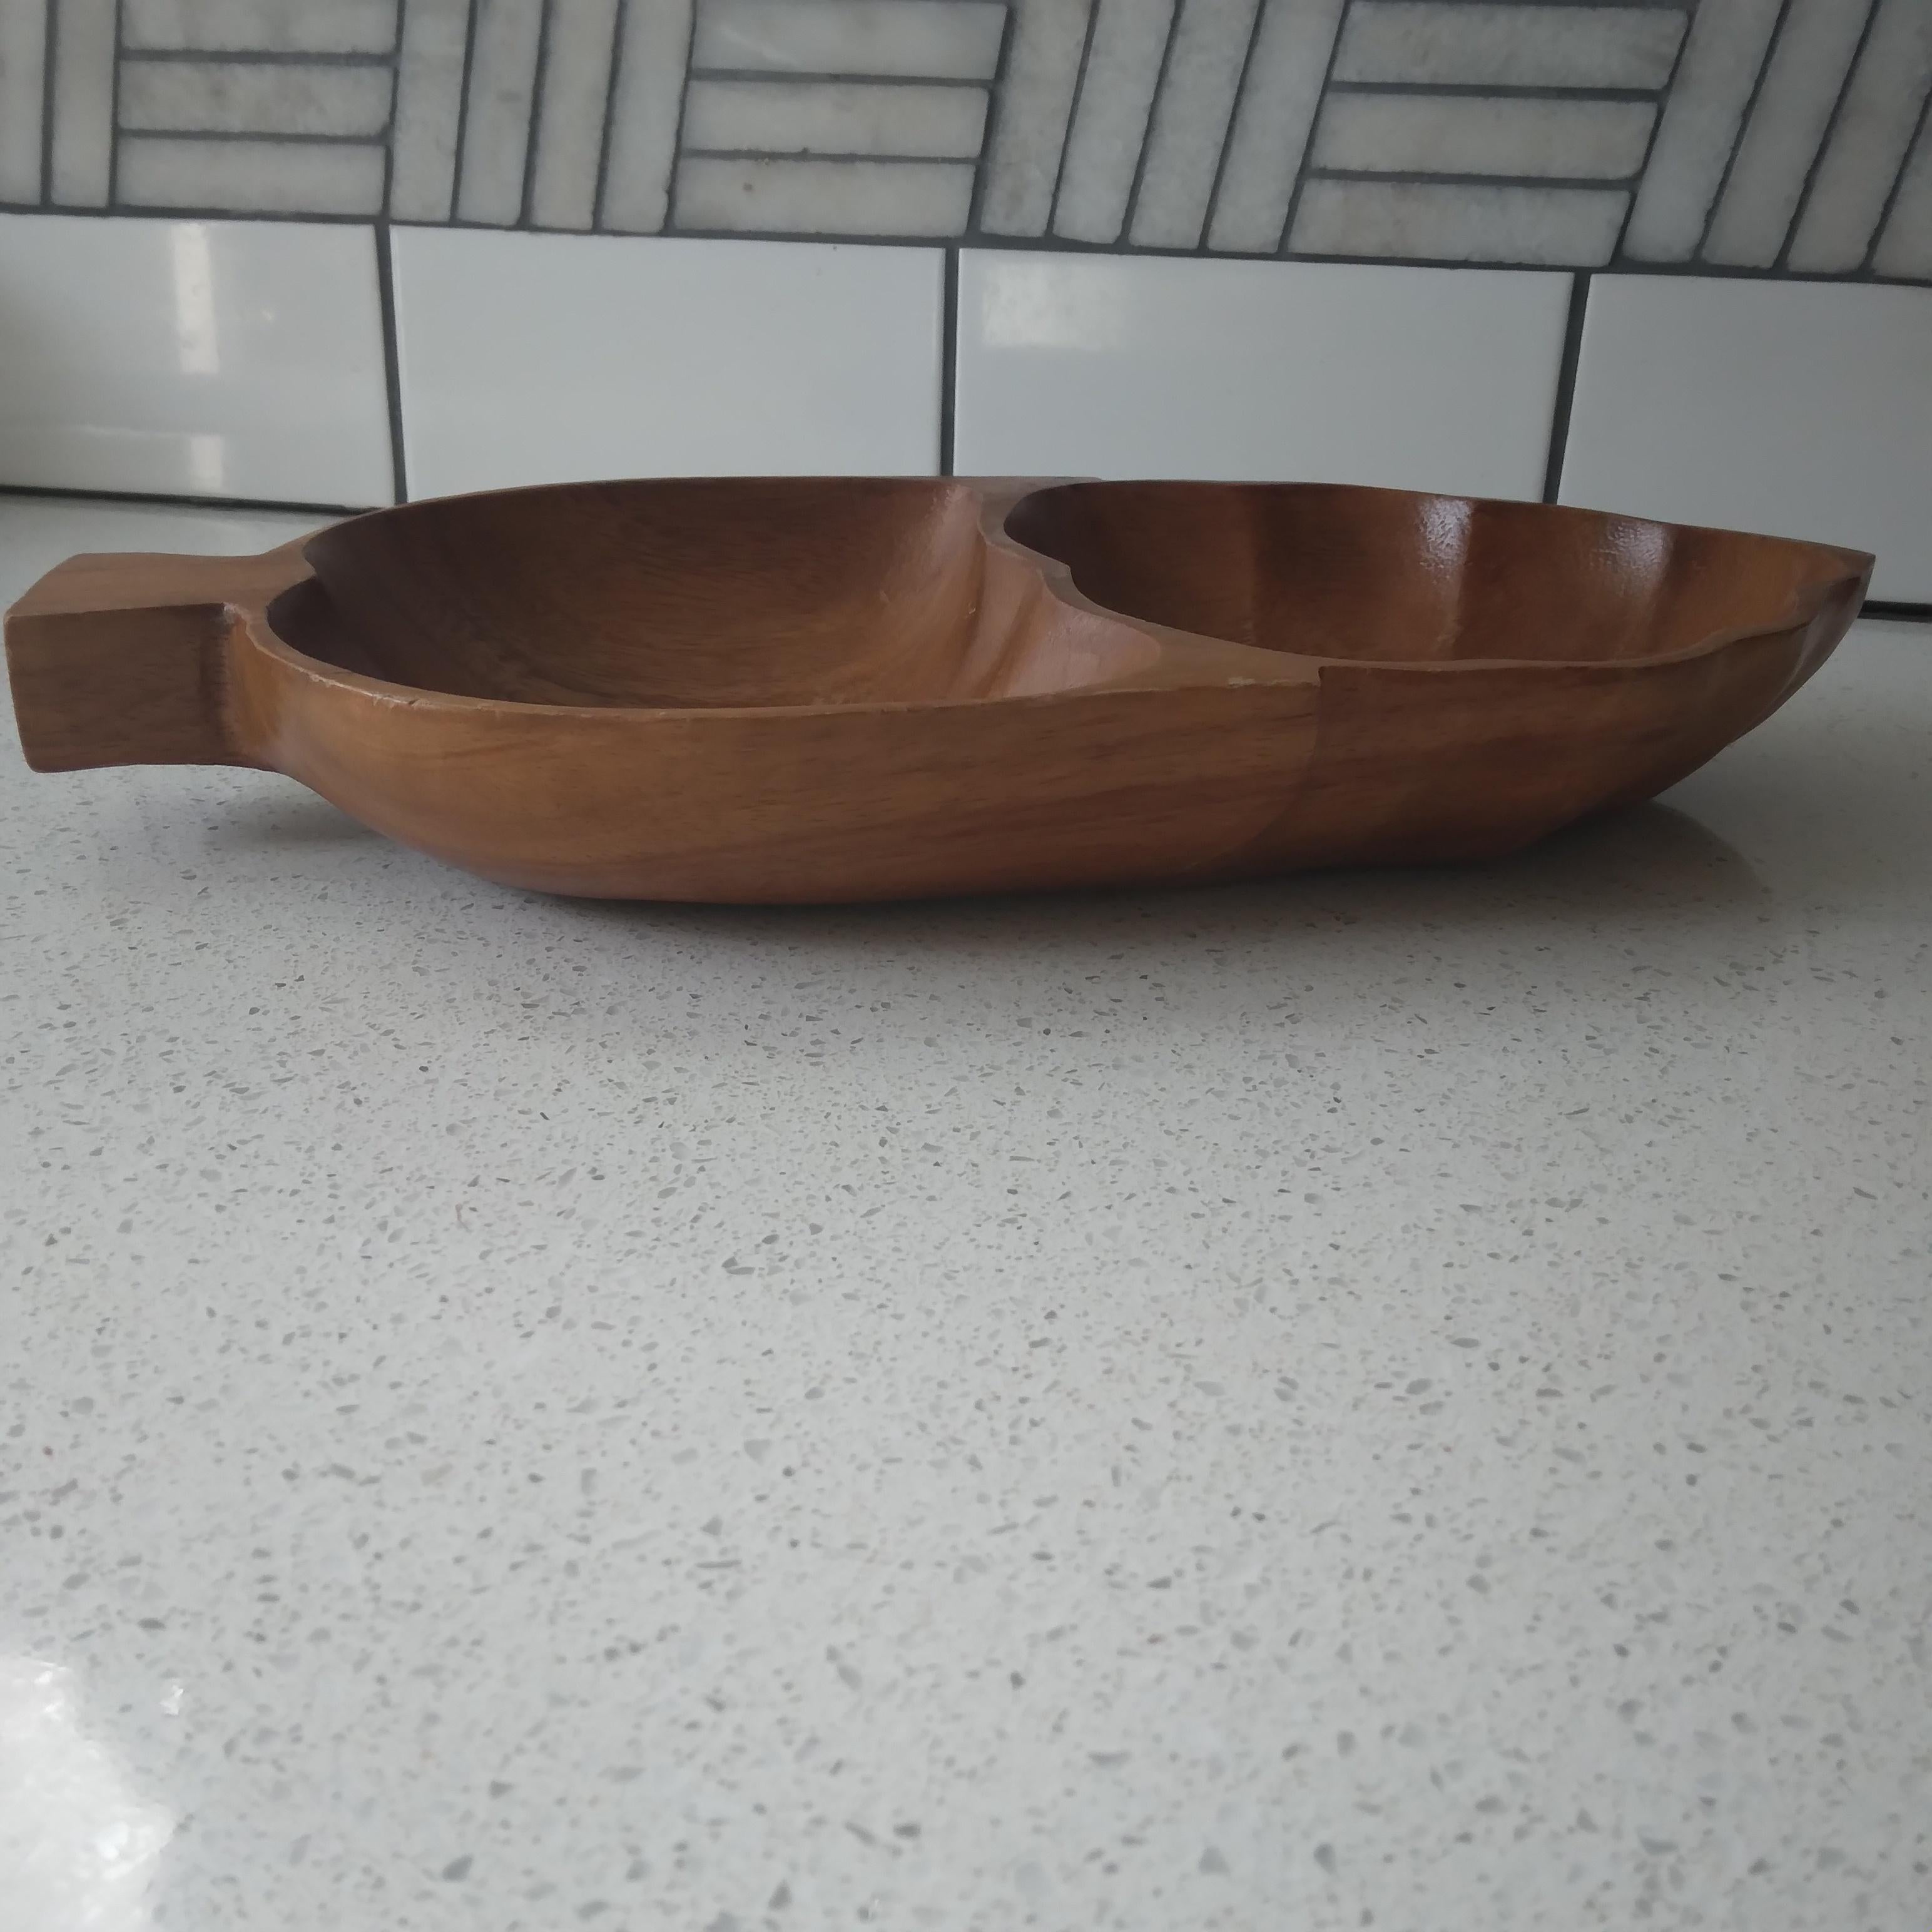 Gorgeous woodgrain and an adorable leaf shape, this two-section decorative bowl is a great way to add natural beauty to your dinnerware collection. 